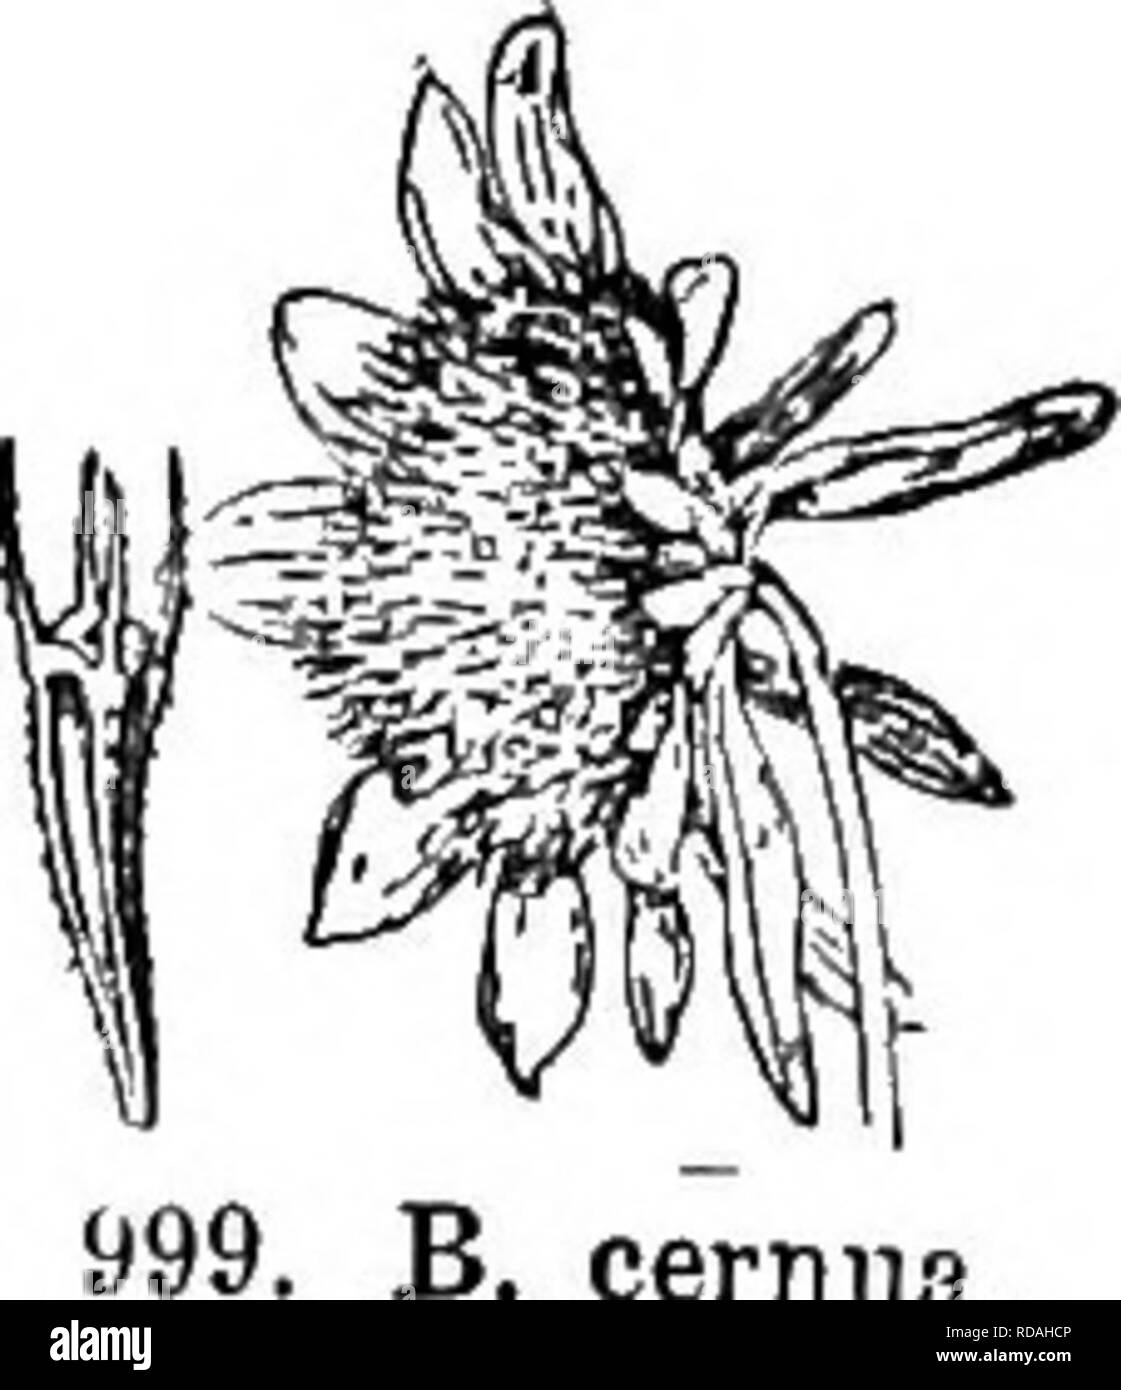 . Gray's new manual of botany. A handbook of the flowering plants and ferns of the central and northeastern United States and adjacent Canada. Botany. COMPOSITAE (COMPOSITE FAMILY) 841. B. cerniia. olive or brown, nearly glabrous, obscurely nerved or nerveless, sometimes punctate ; awns nearly J as long as the achene, equaling the i-loothed pale-yellow corolla. (B. connata, var. Gray.) —Sandy shores and rich soil, N. E. to Minn., westw. and southw. Sept., Oct. Fis. 997. ^S'l'- acita Wiegand. Leaves subsessile ; heads larger; outer bracts sbortei (barely twice exceeding the disk), spreading, ac Stock Photo